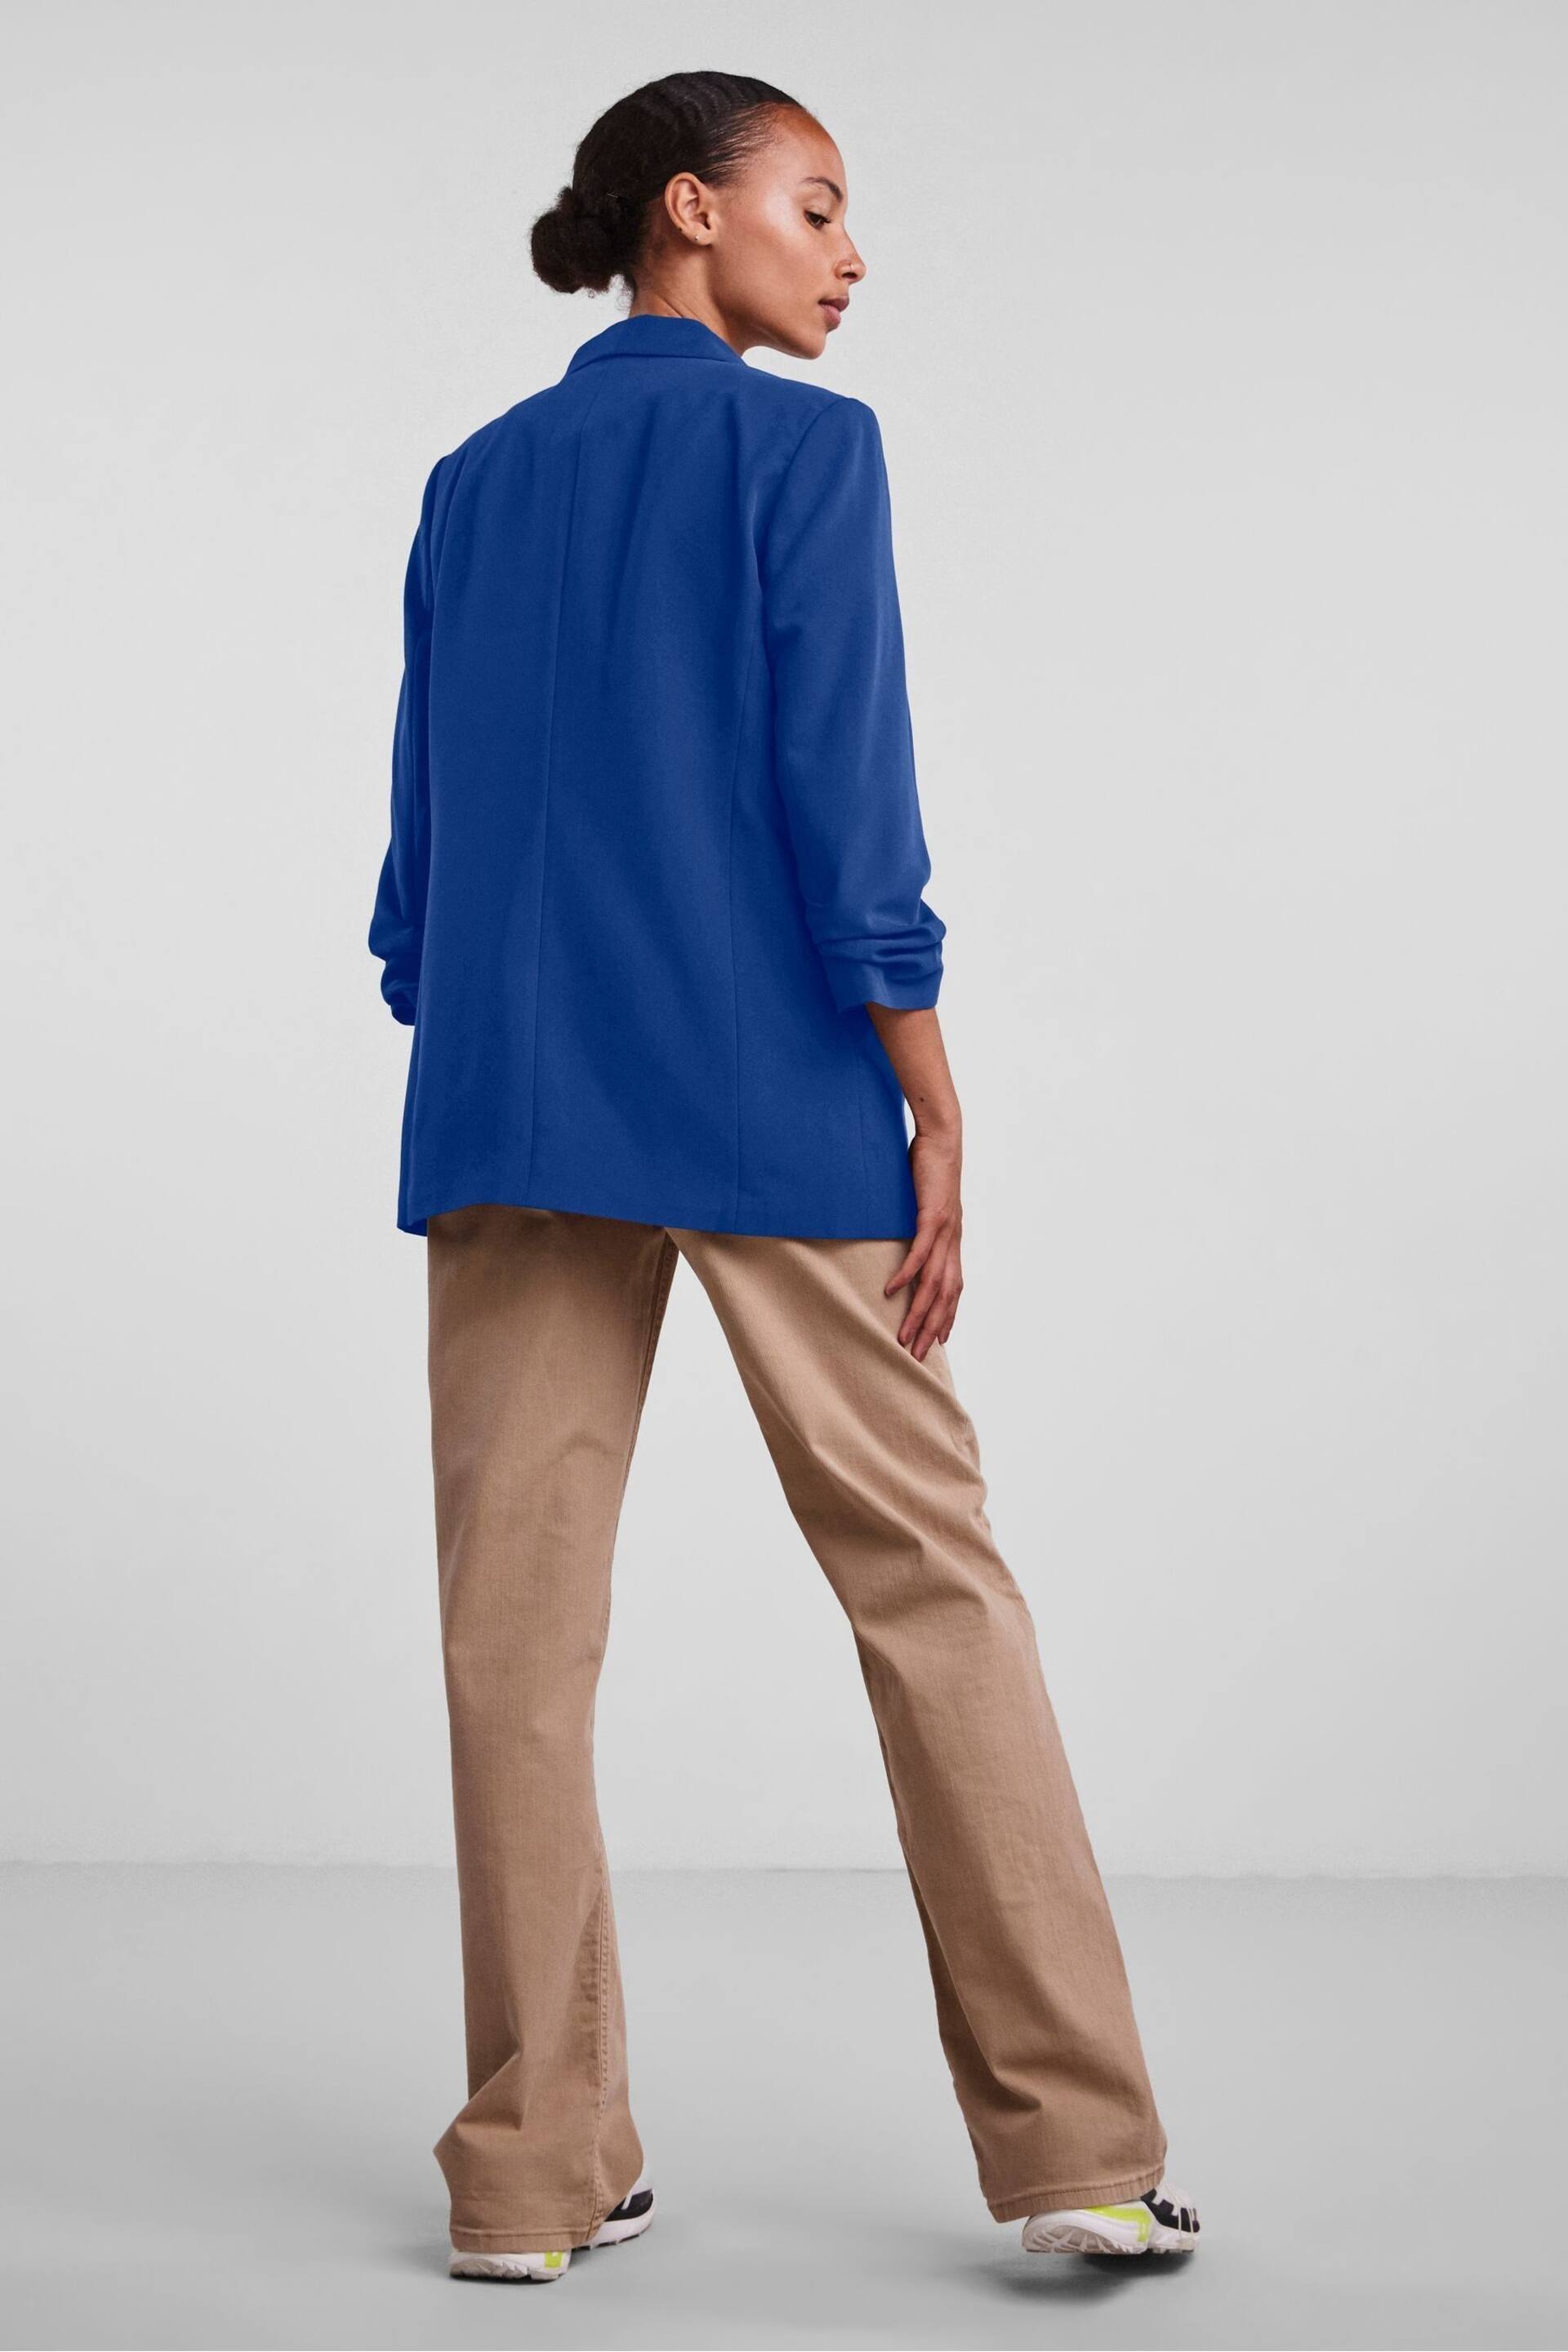 PIECES Blue Relaxed Ruched Sleeve Workwear Blazer - Image 3 of 6